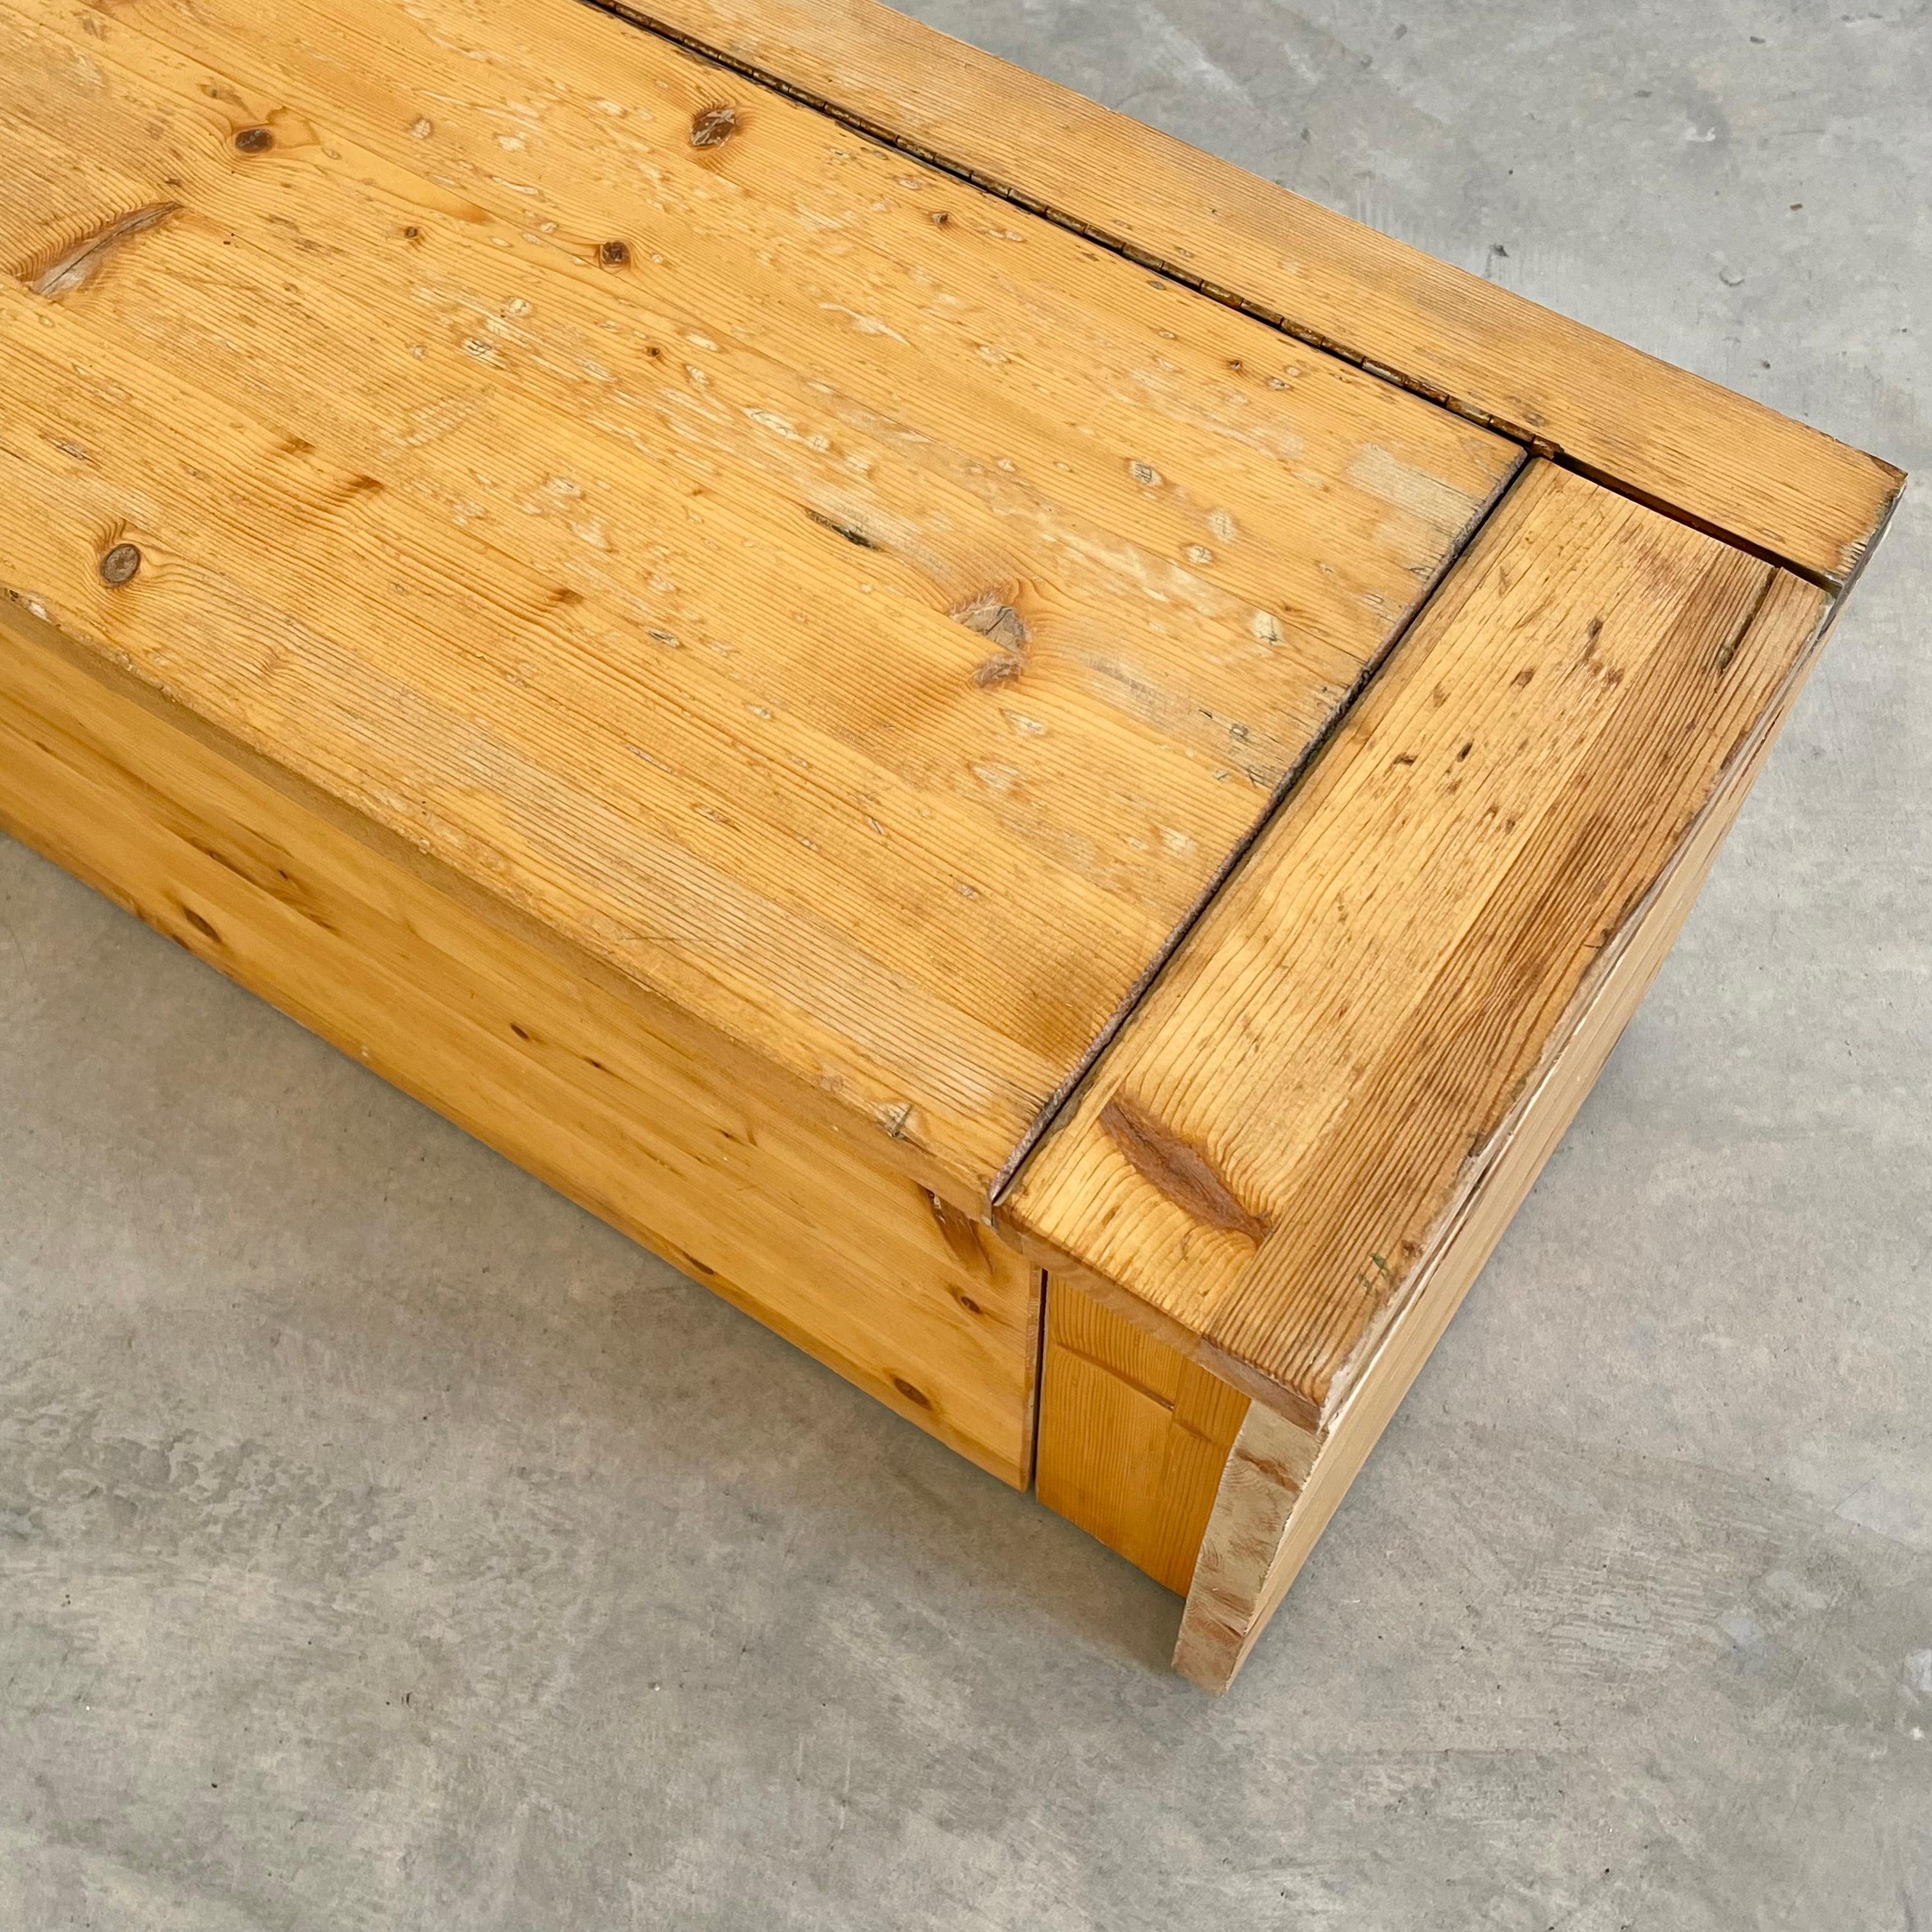 Monumental Charlotte Perriand Pine Storage Bench for Les Arcs, 1960s For Sale 7